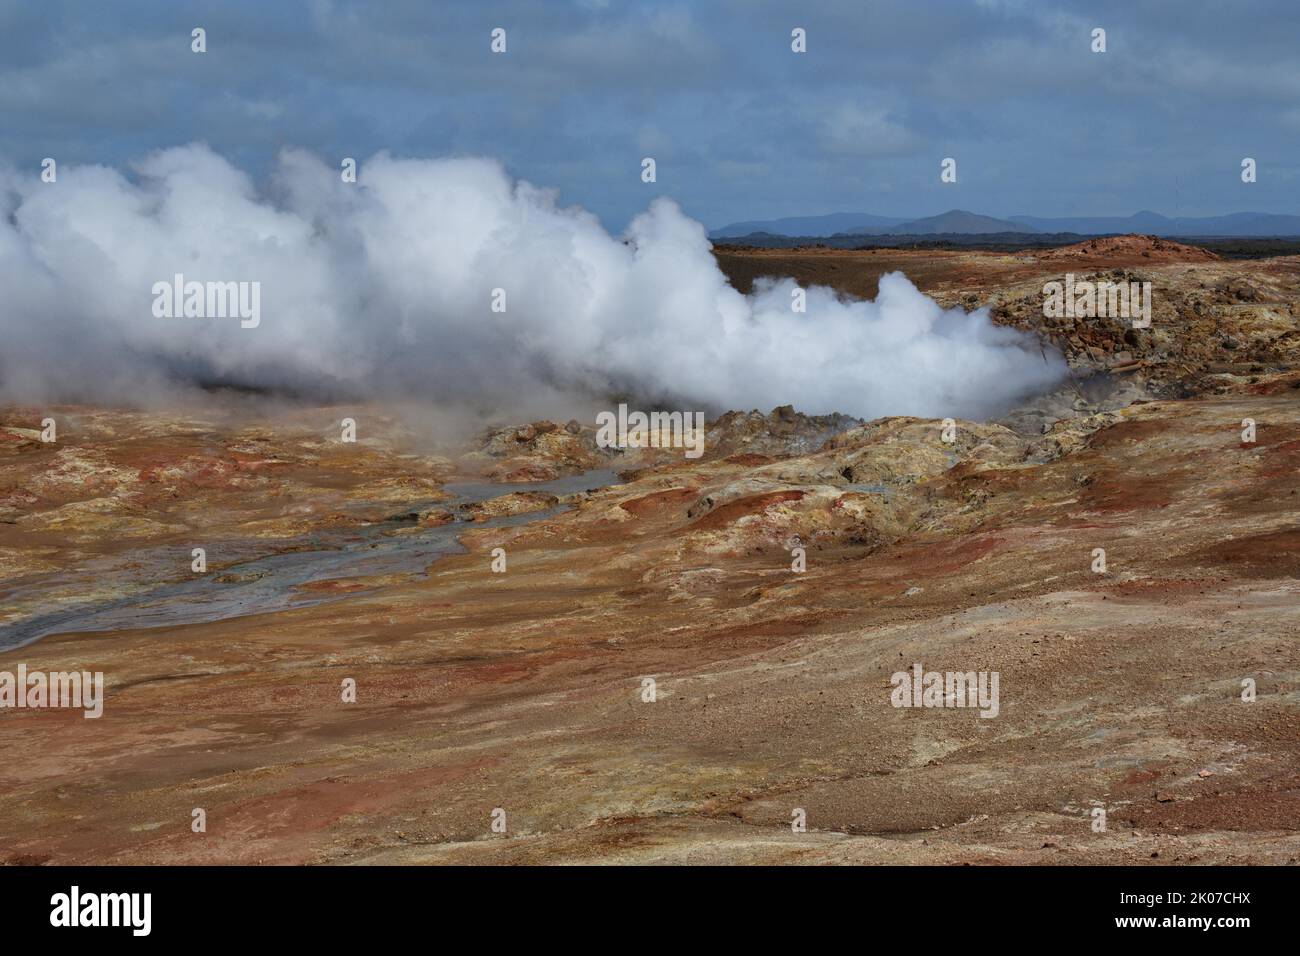 Escaping steam in the Gunnahver high-temperature area on the south-western tip of the Reykjanes peninsula, Iceland Stock Photo